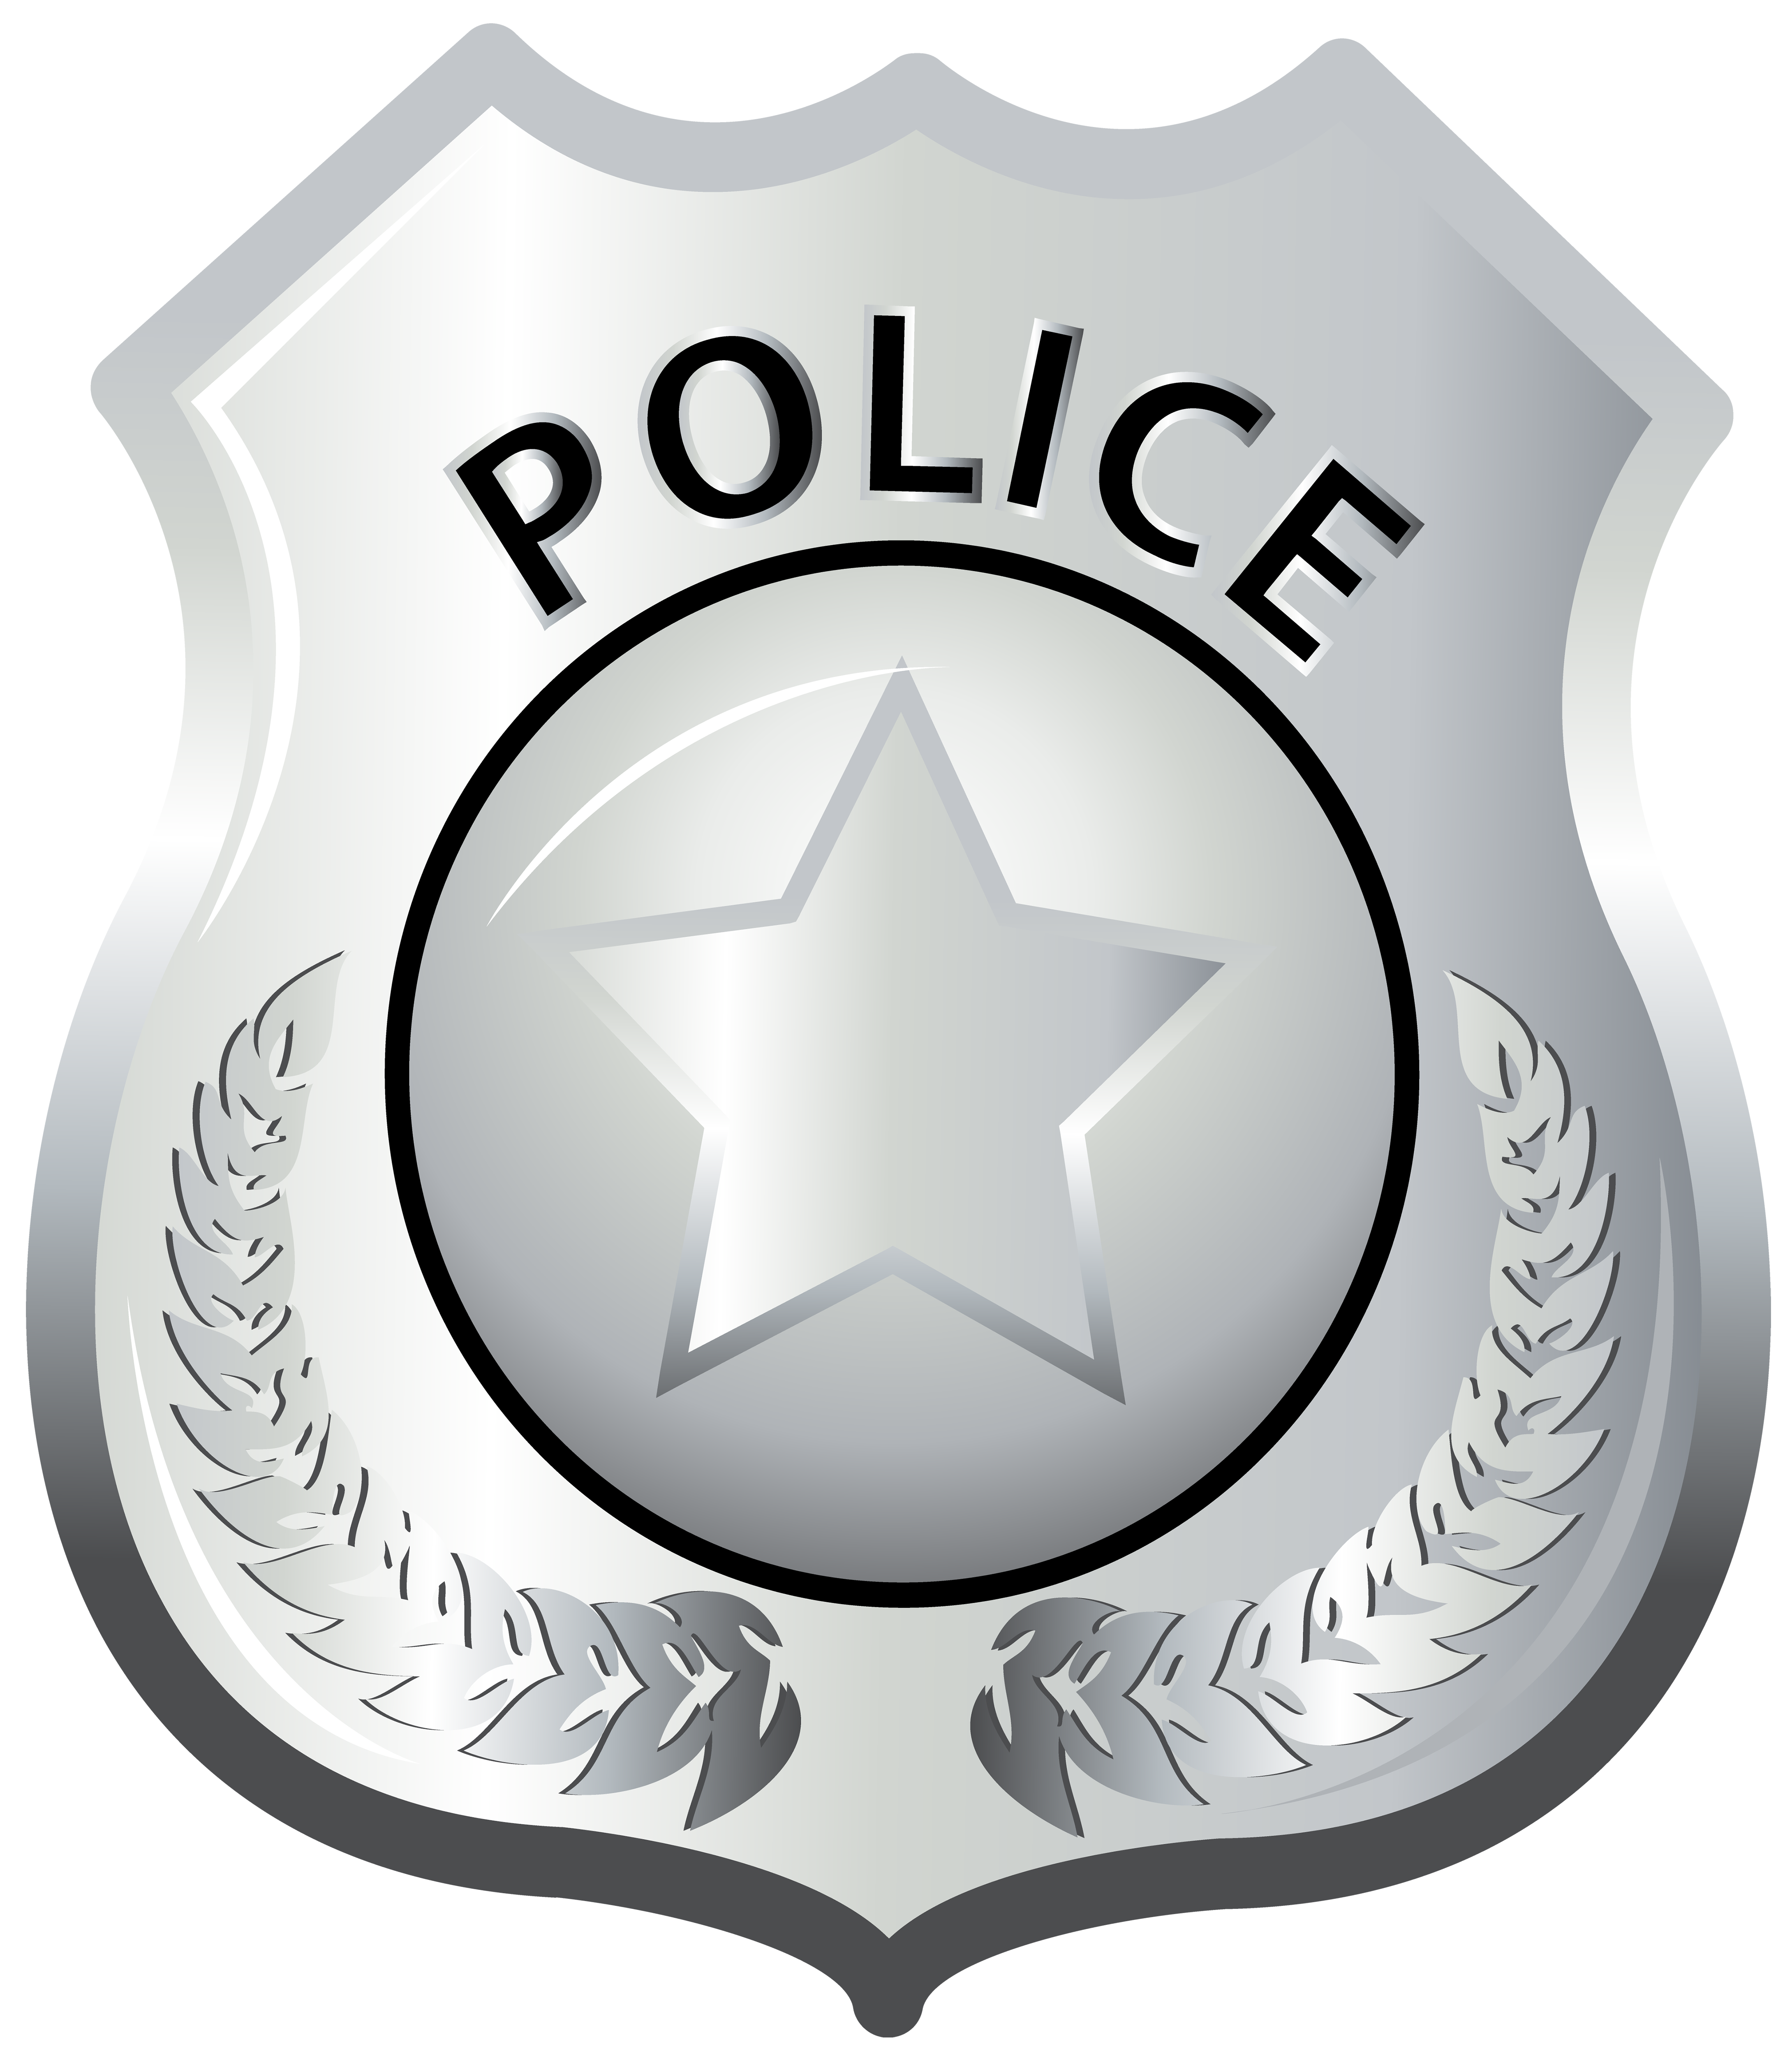 Handcuff clipart police officer. Badge lapel pin png